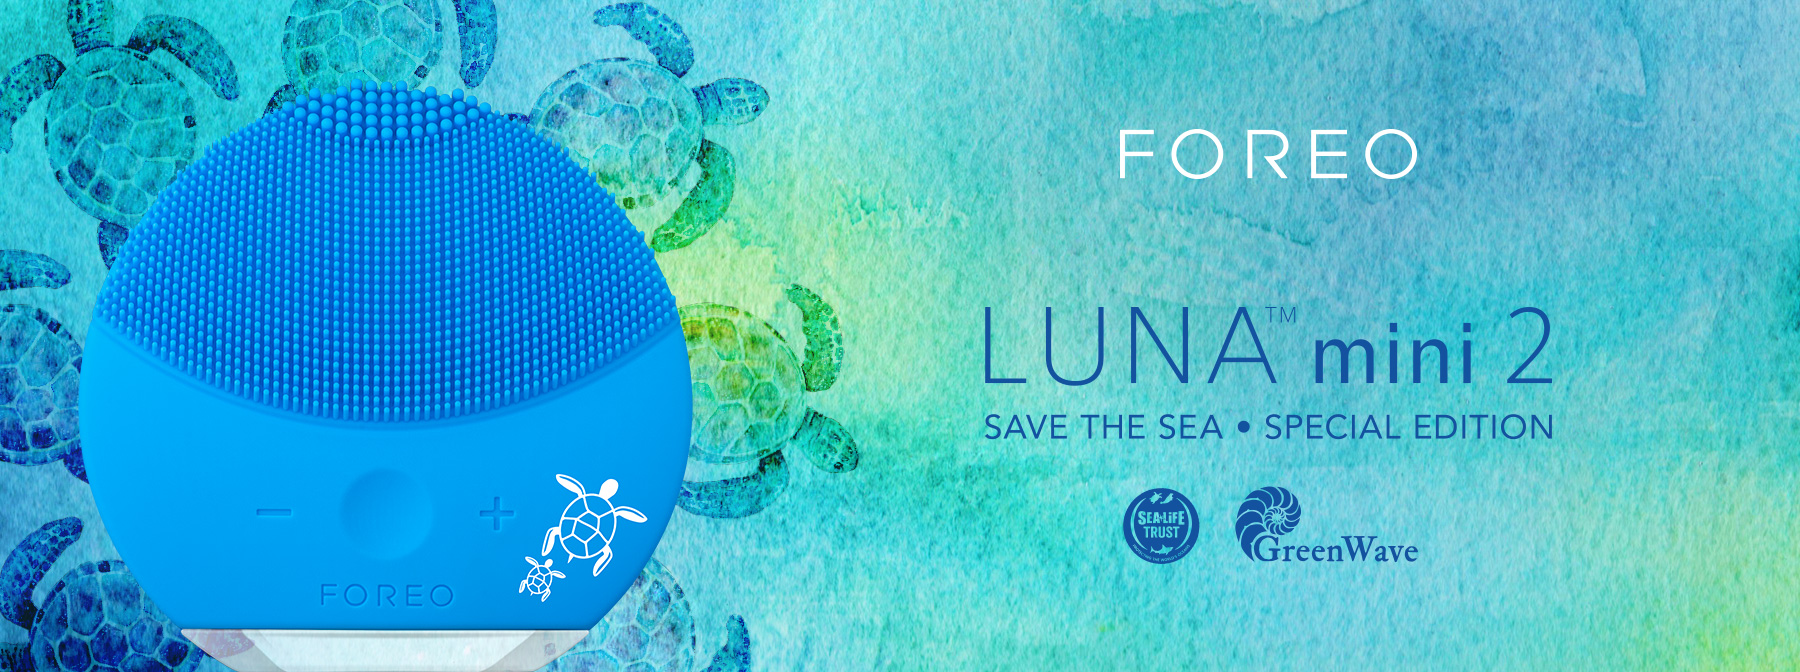 FOREO Launch New Save The Sea Edition